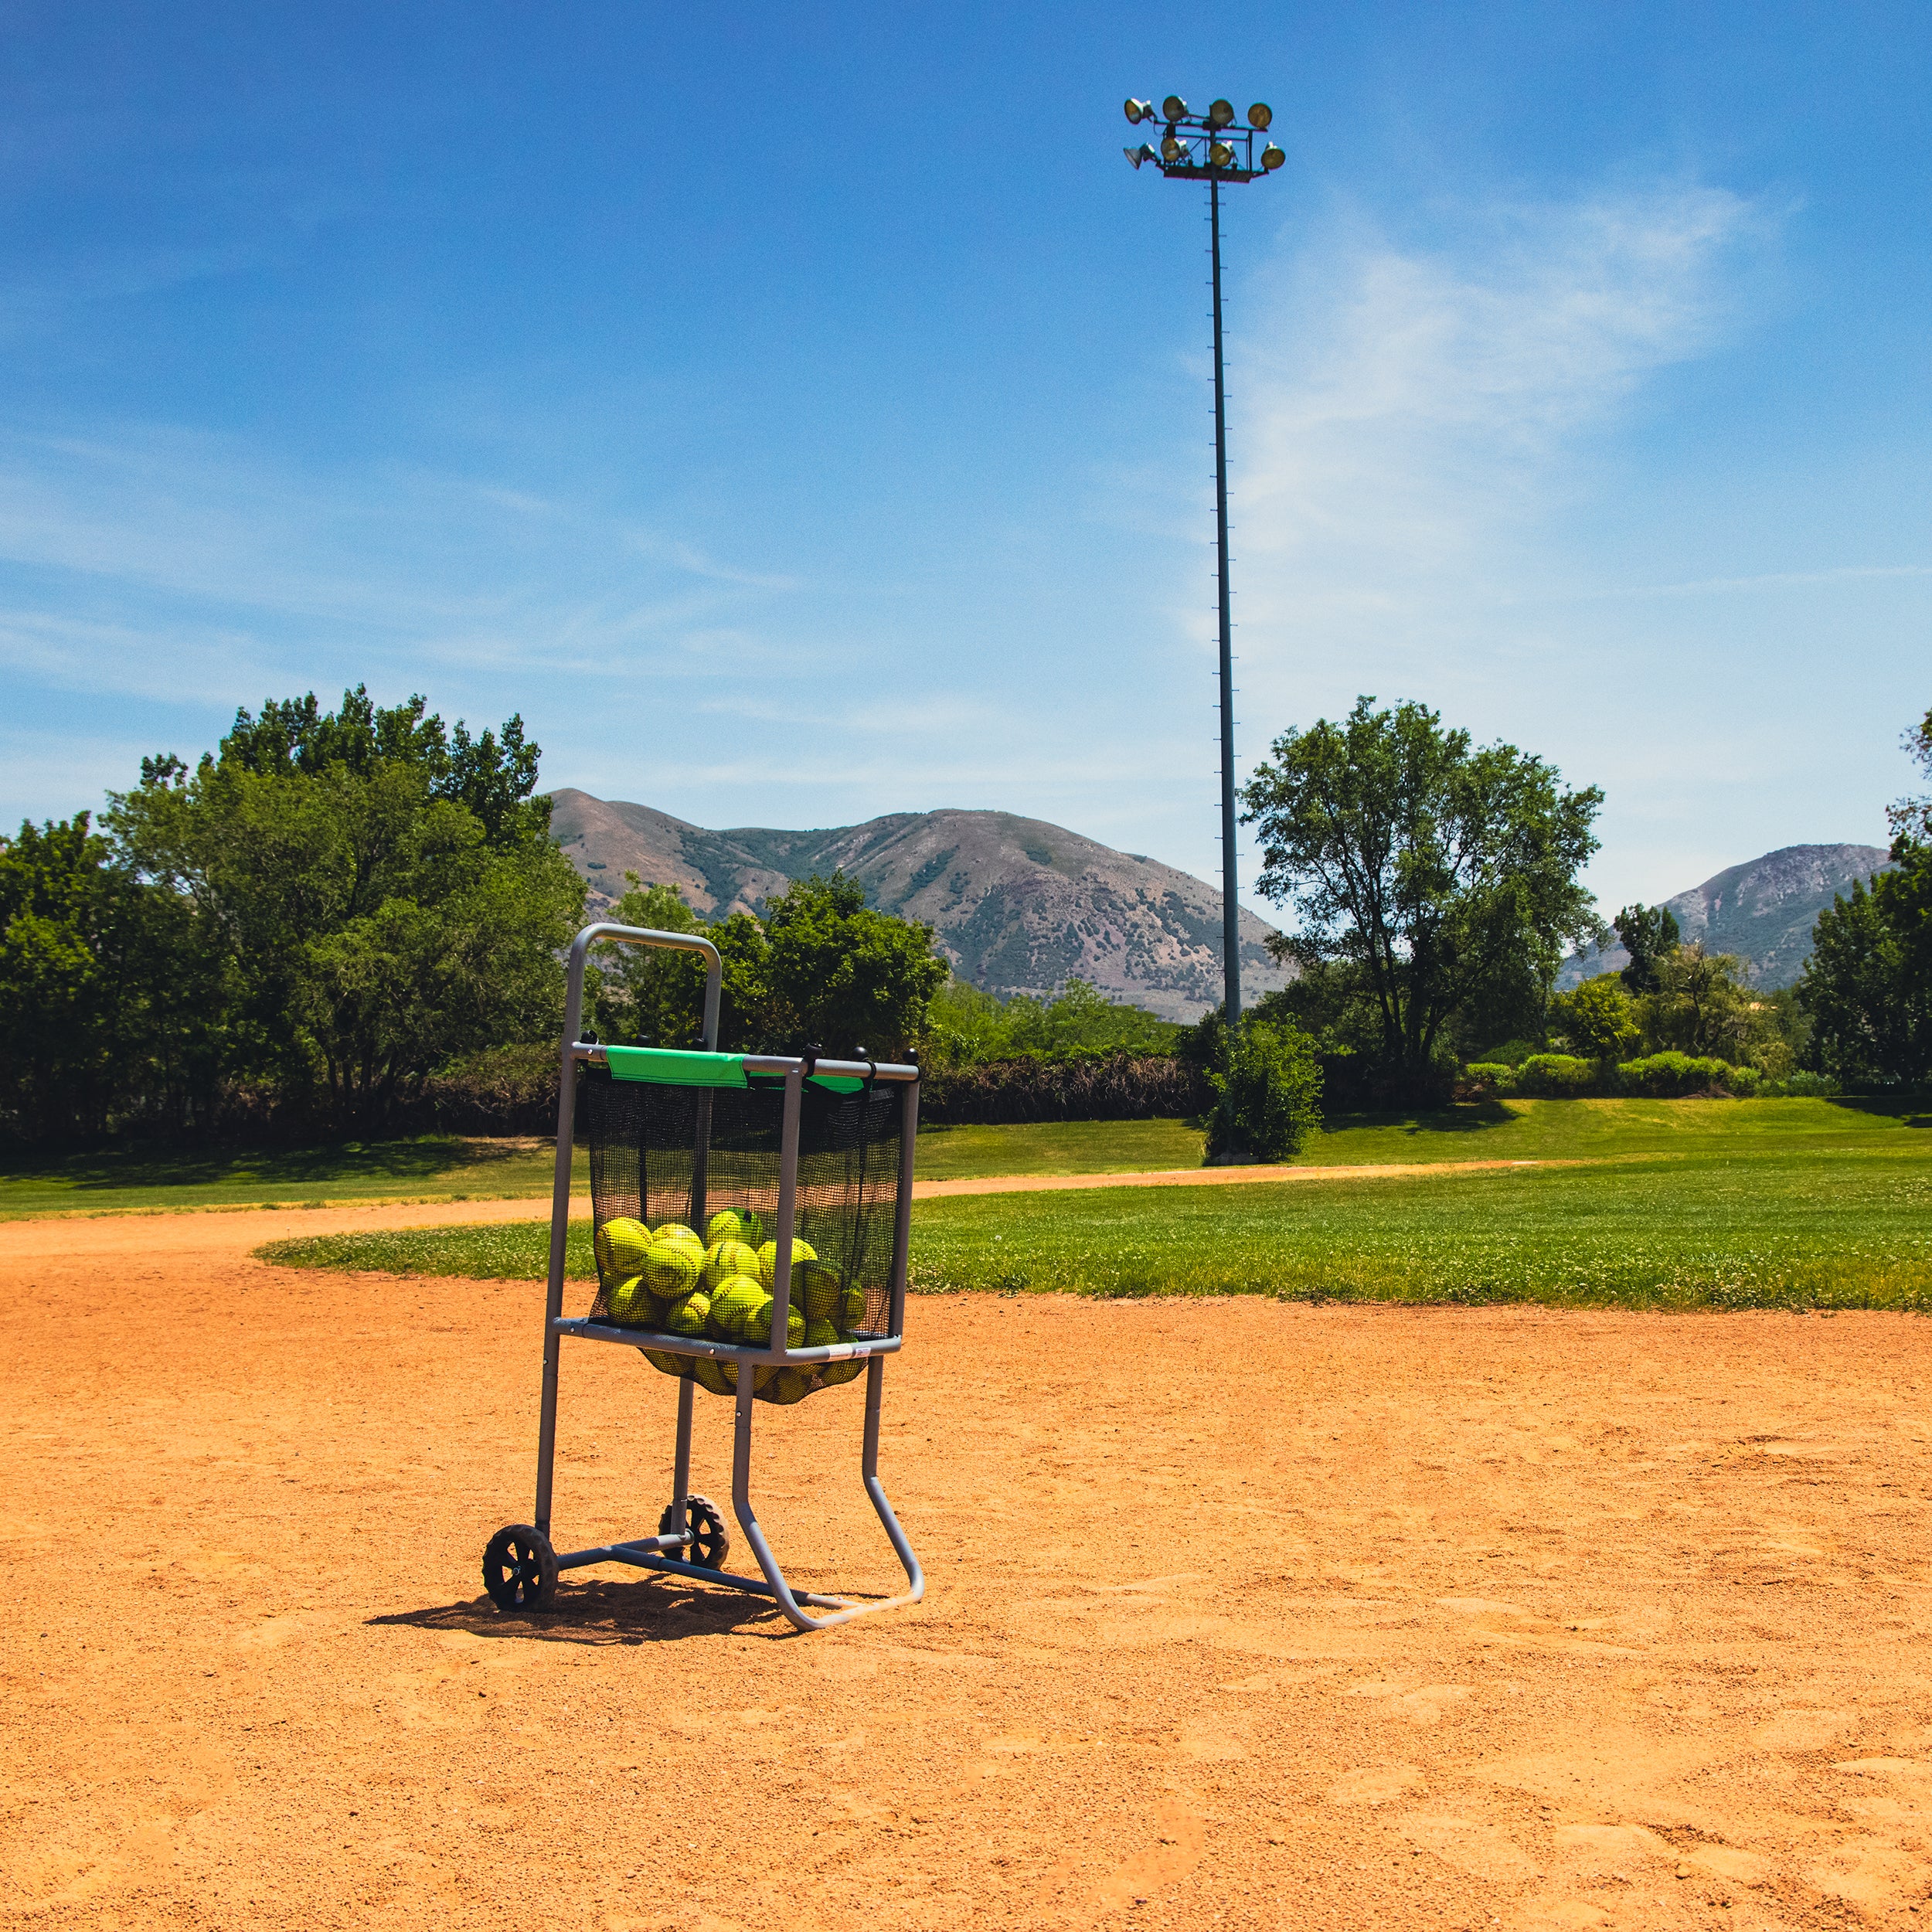 The Baseball and Softball Cart with Wheels holds softballs inside while sitting on a baseball field. 